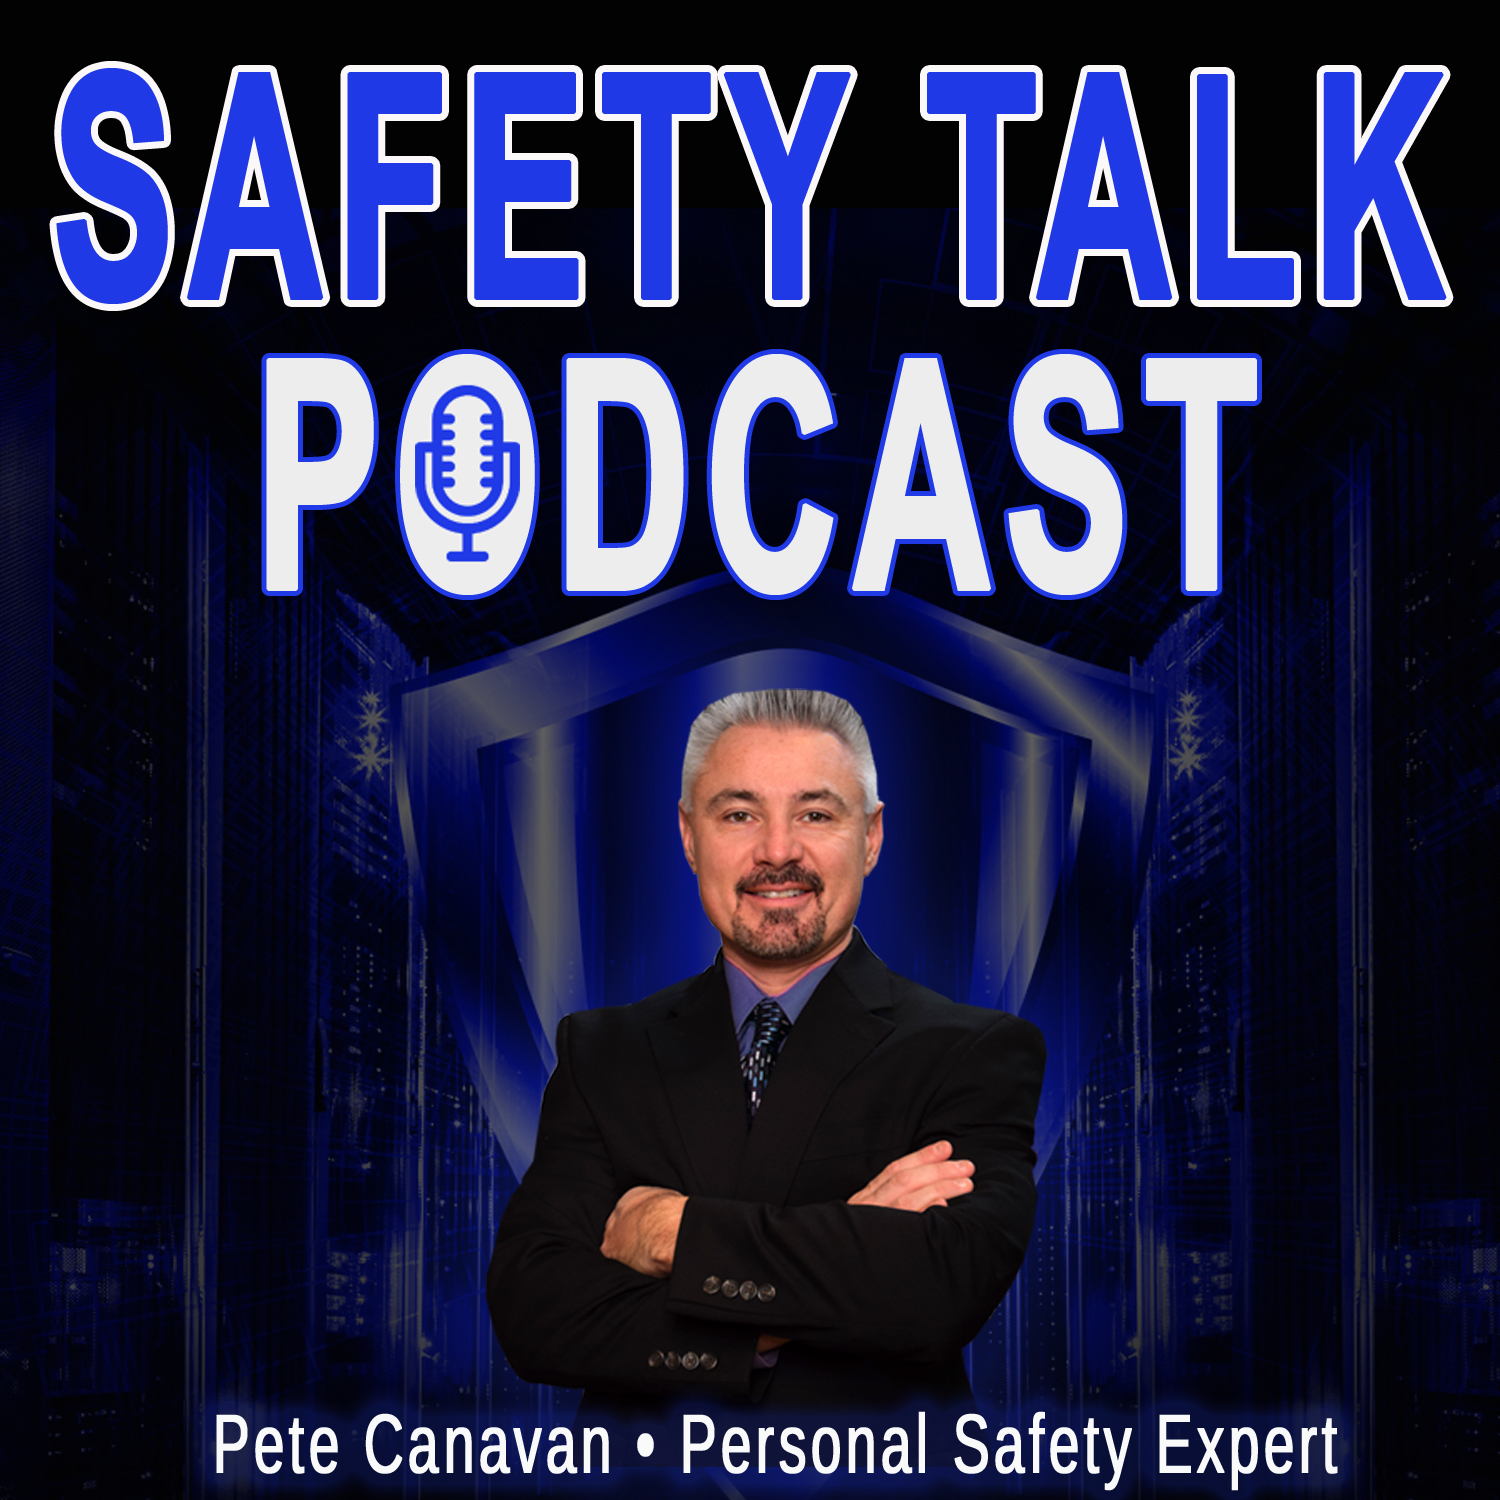 Safety Talk Podcast with host Pete Canavan